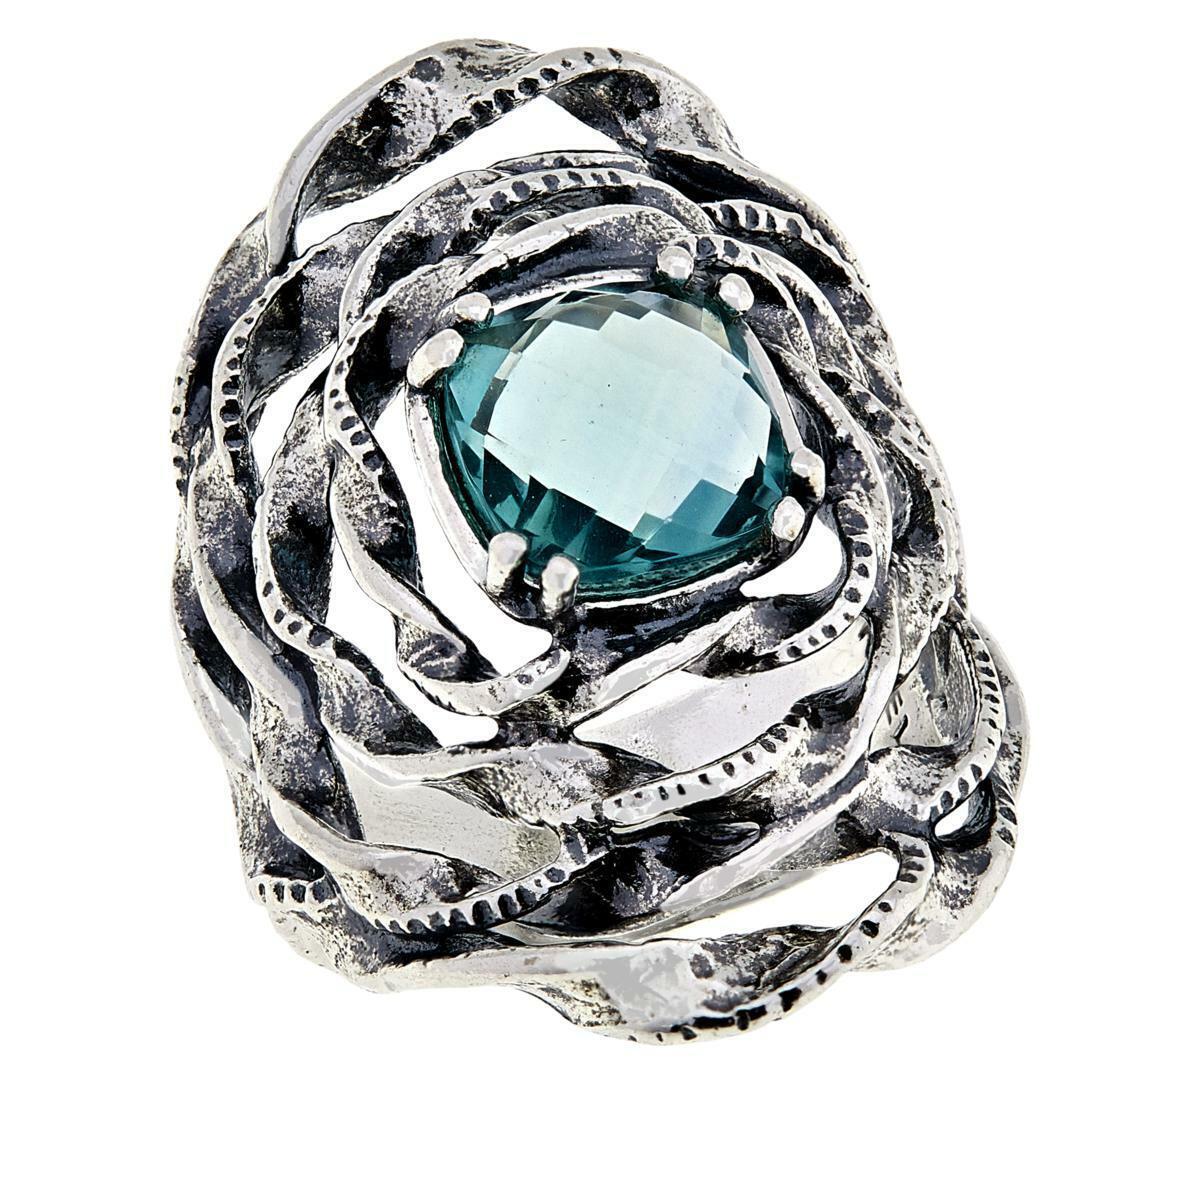 LiPaz Floral Sterling Silver Fluorite Ring, Size 5